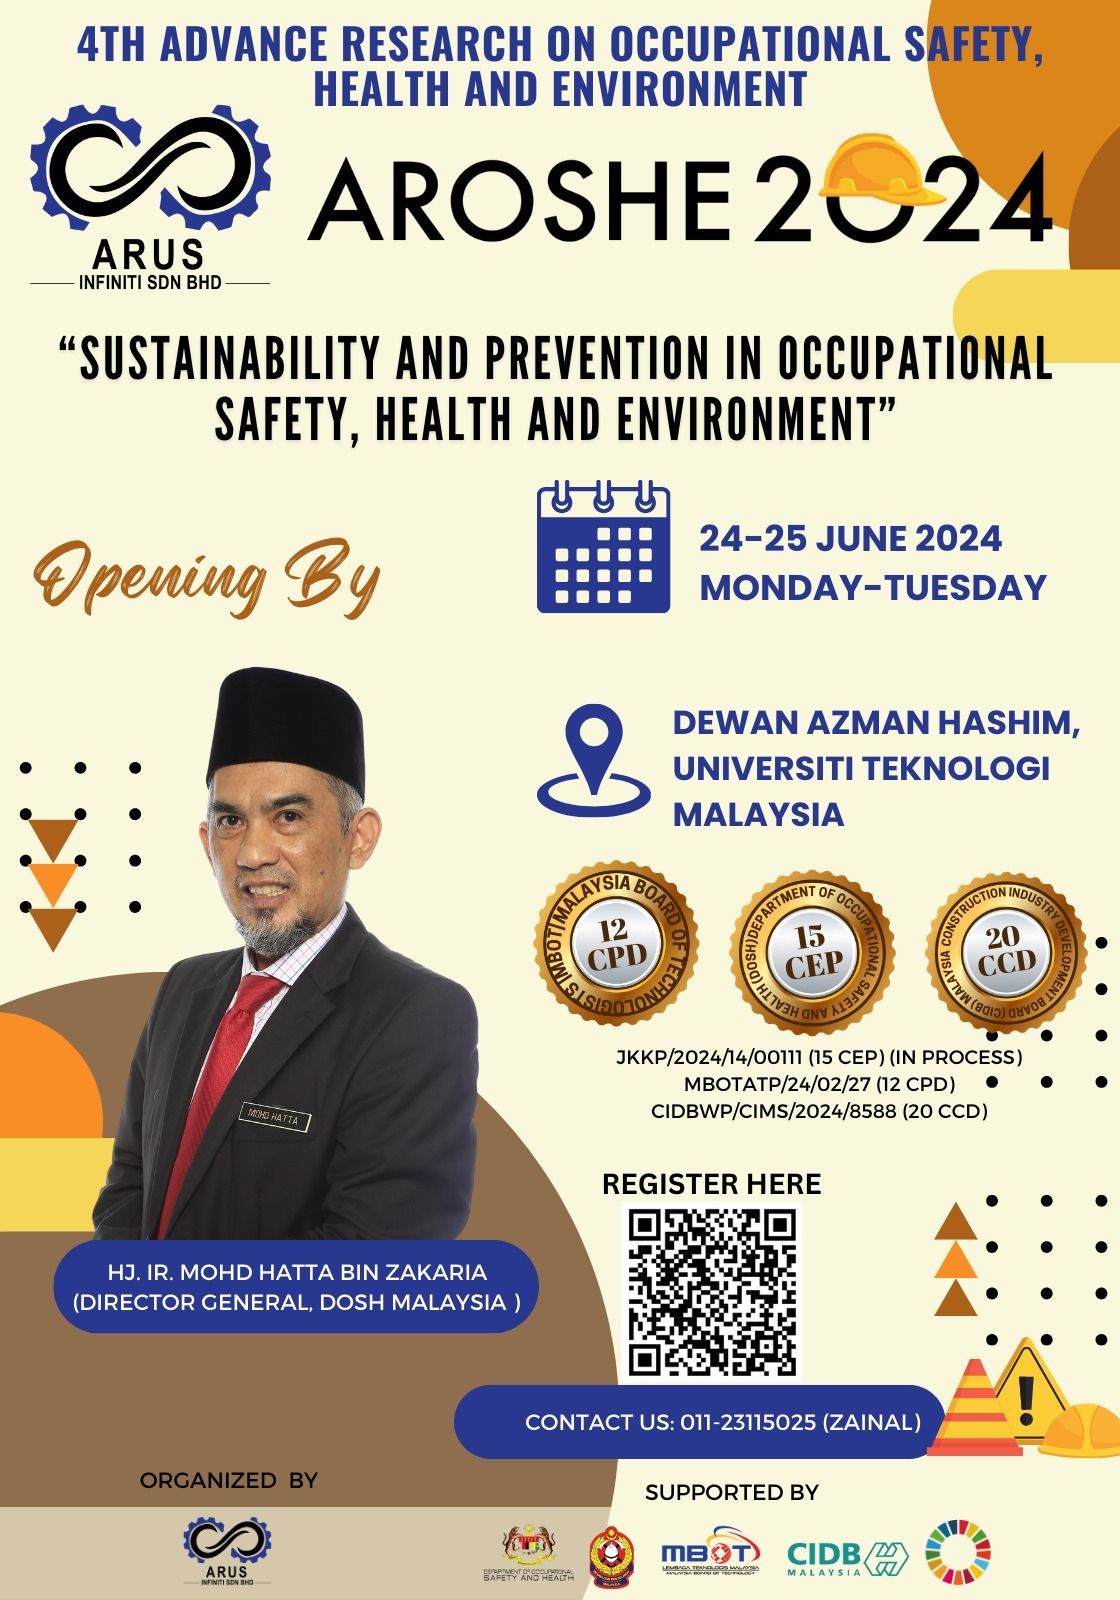 4TH ADVANCED RESEARCH ON OCCUPATIONAL SAFETY AND HEALTH ENVIRONMENT 2024